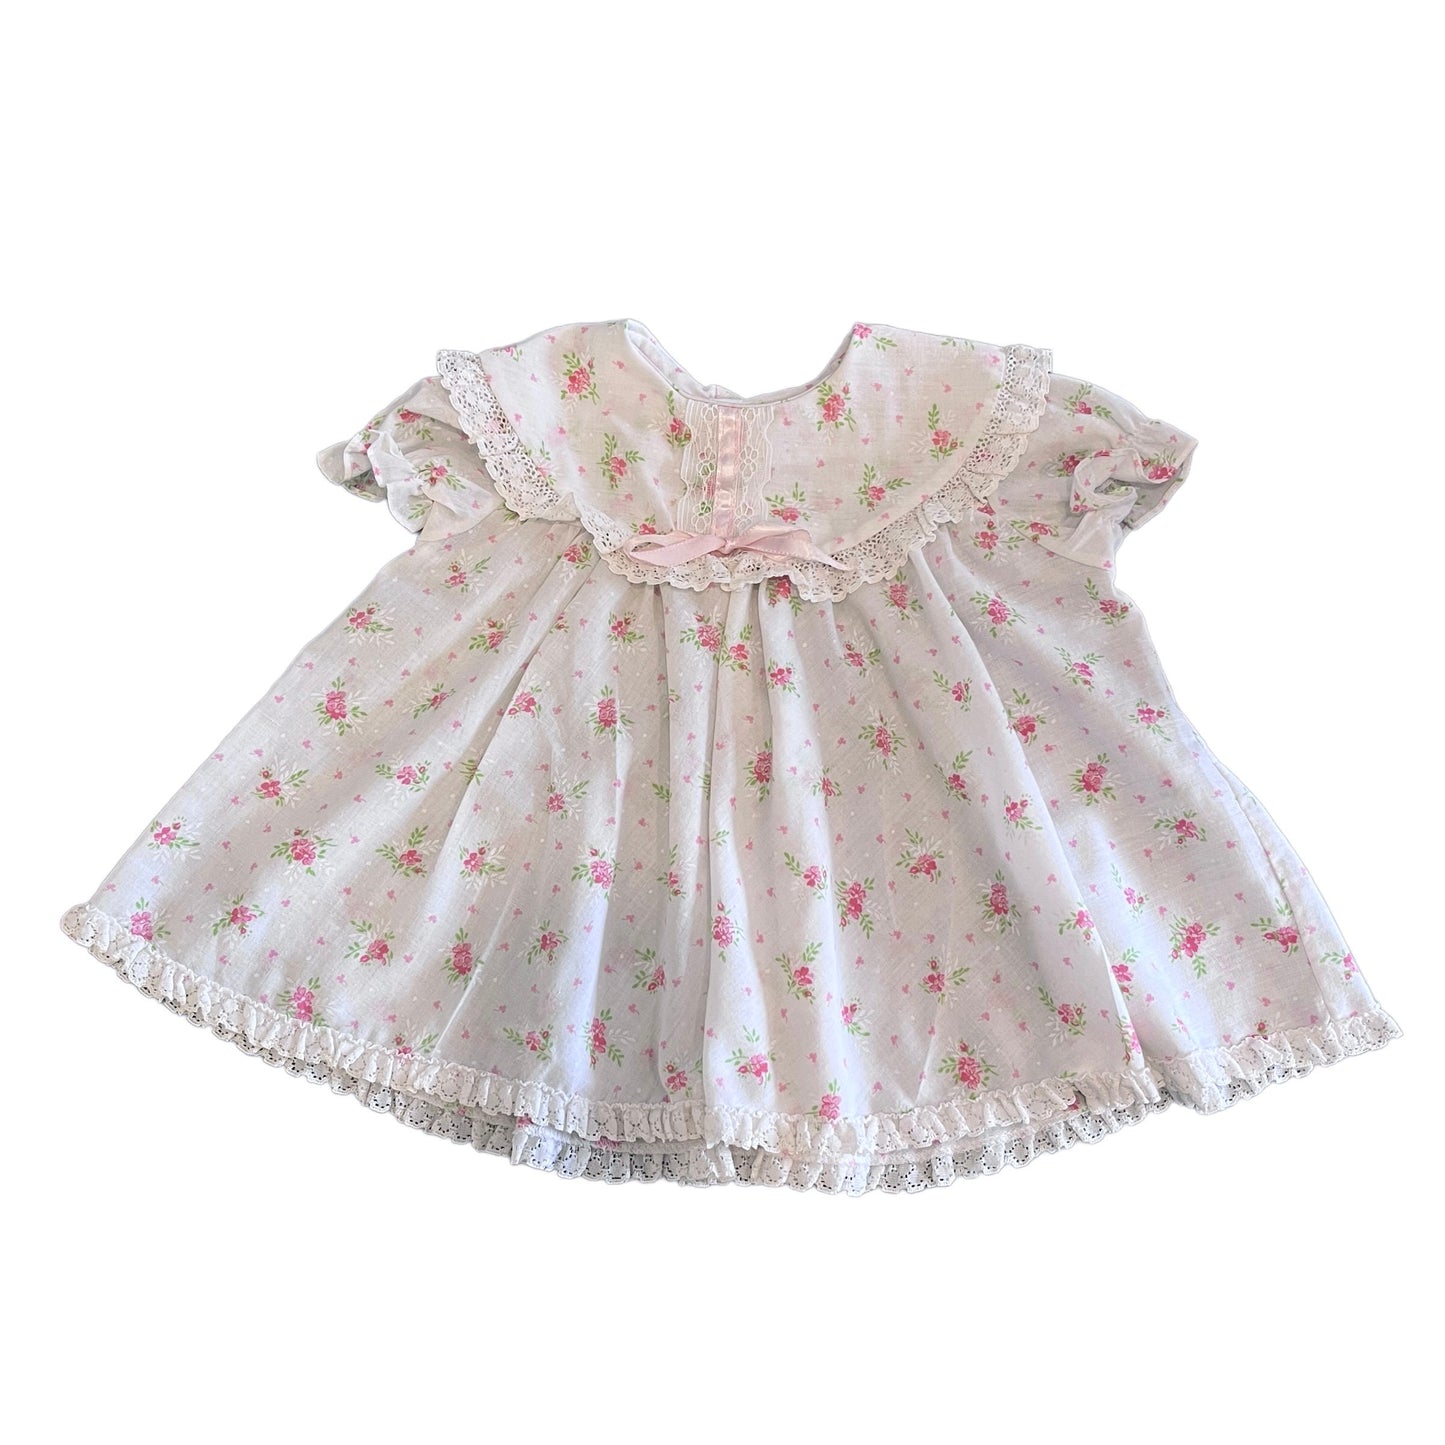 Vintage 1980s White Floral Ruffle Dress 6-9 Months